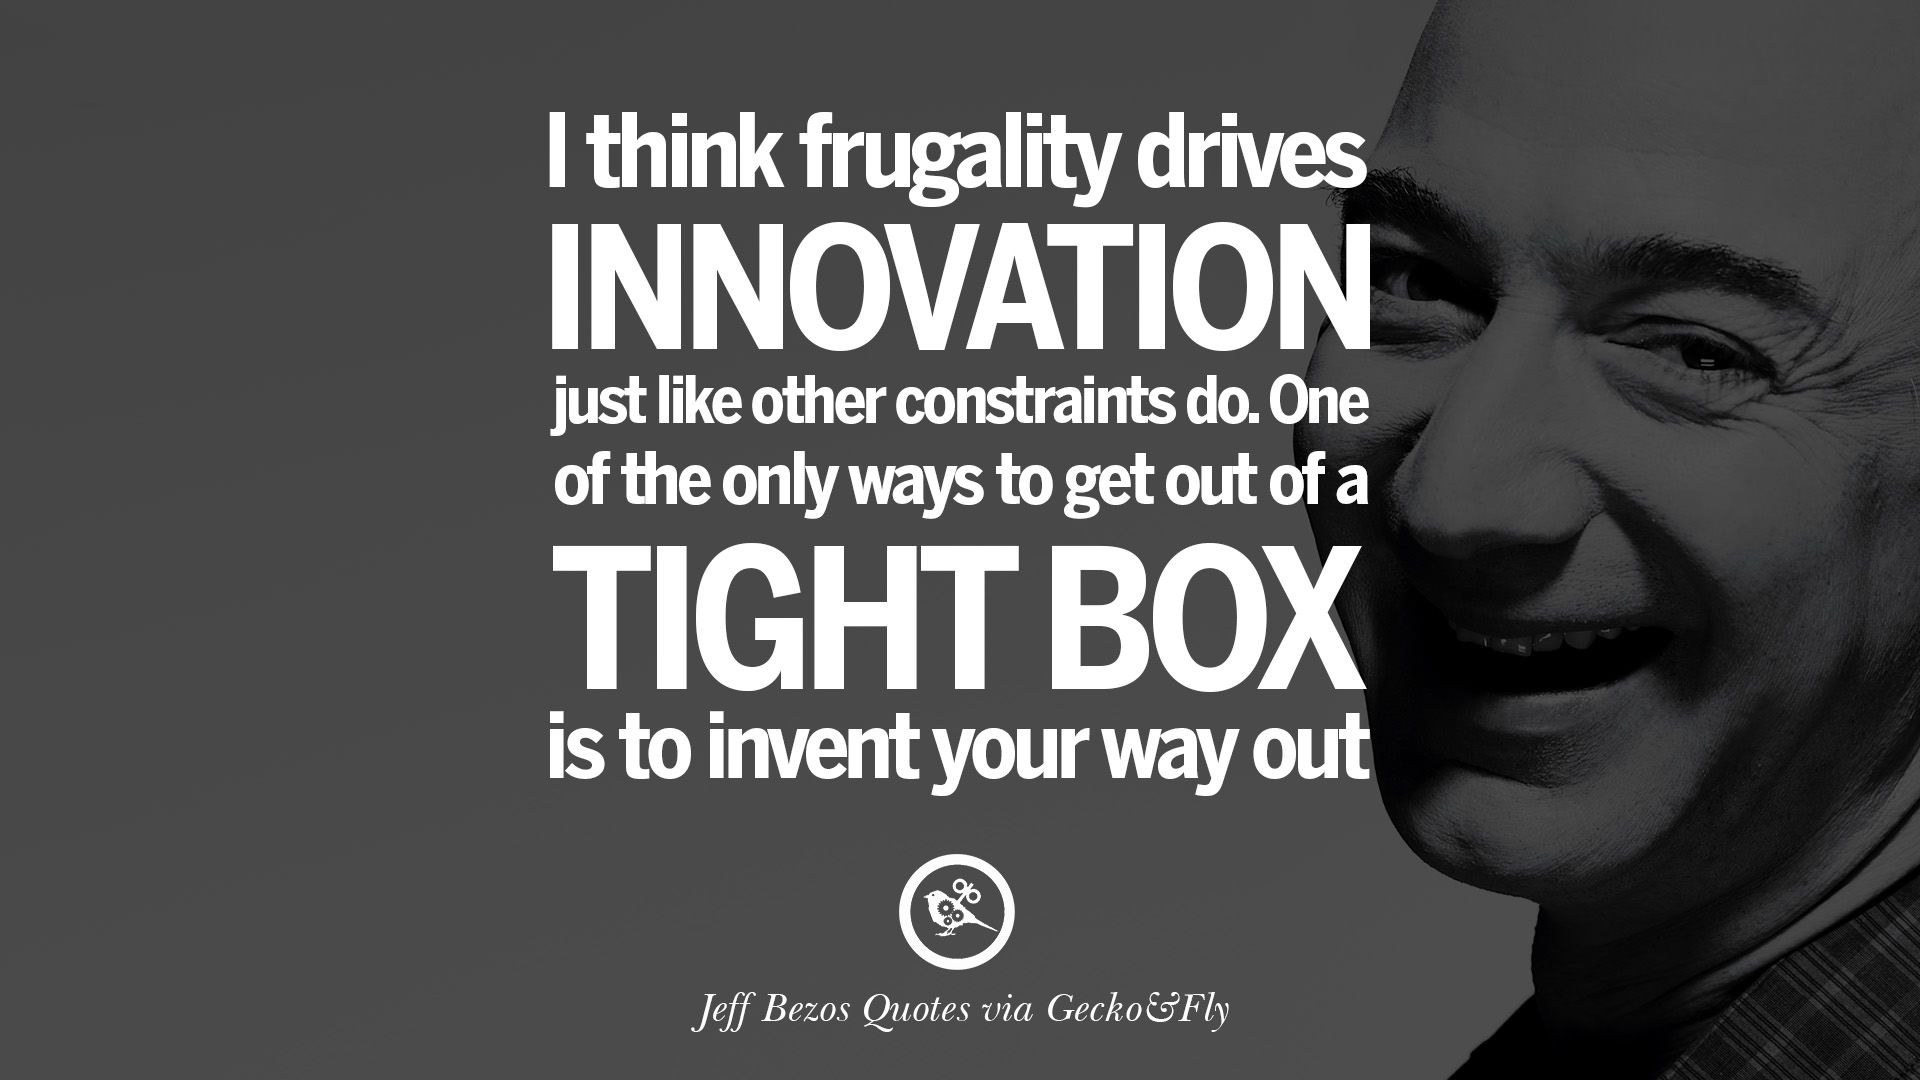 Famous Jeff Bezos Quotes on Innovation, Business, Commerce and Customers